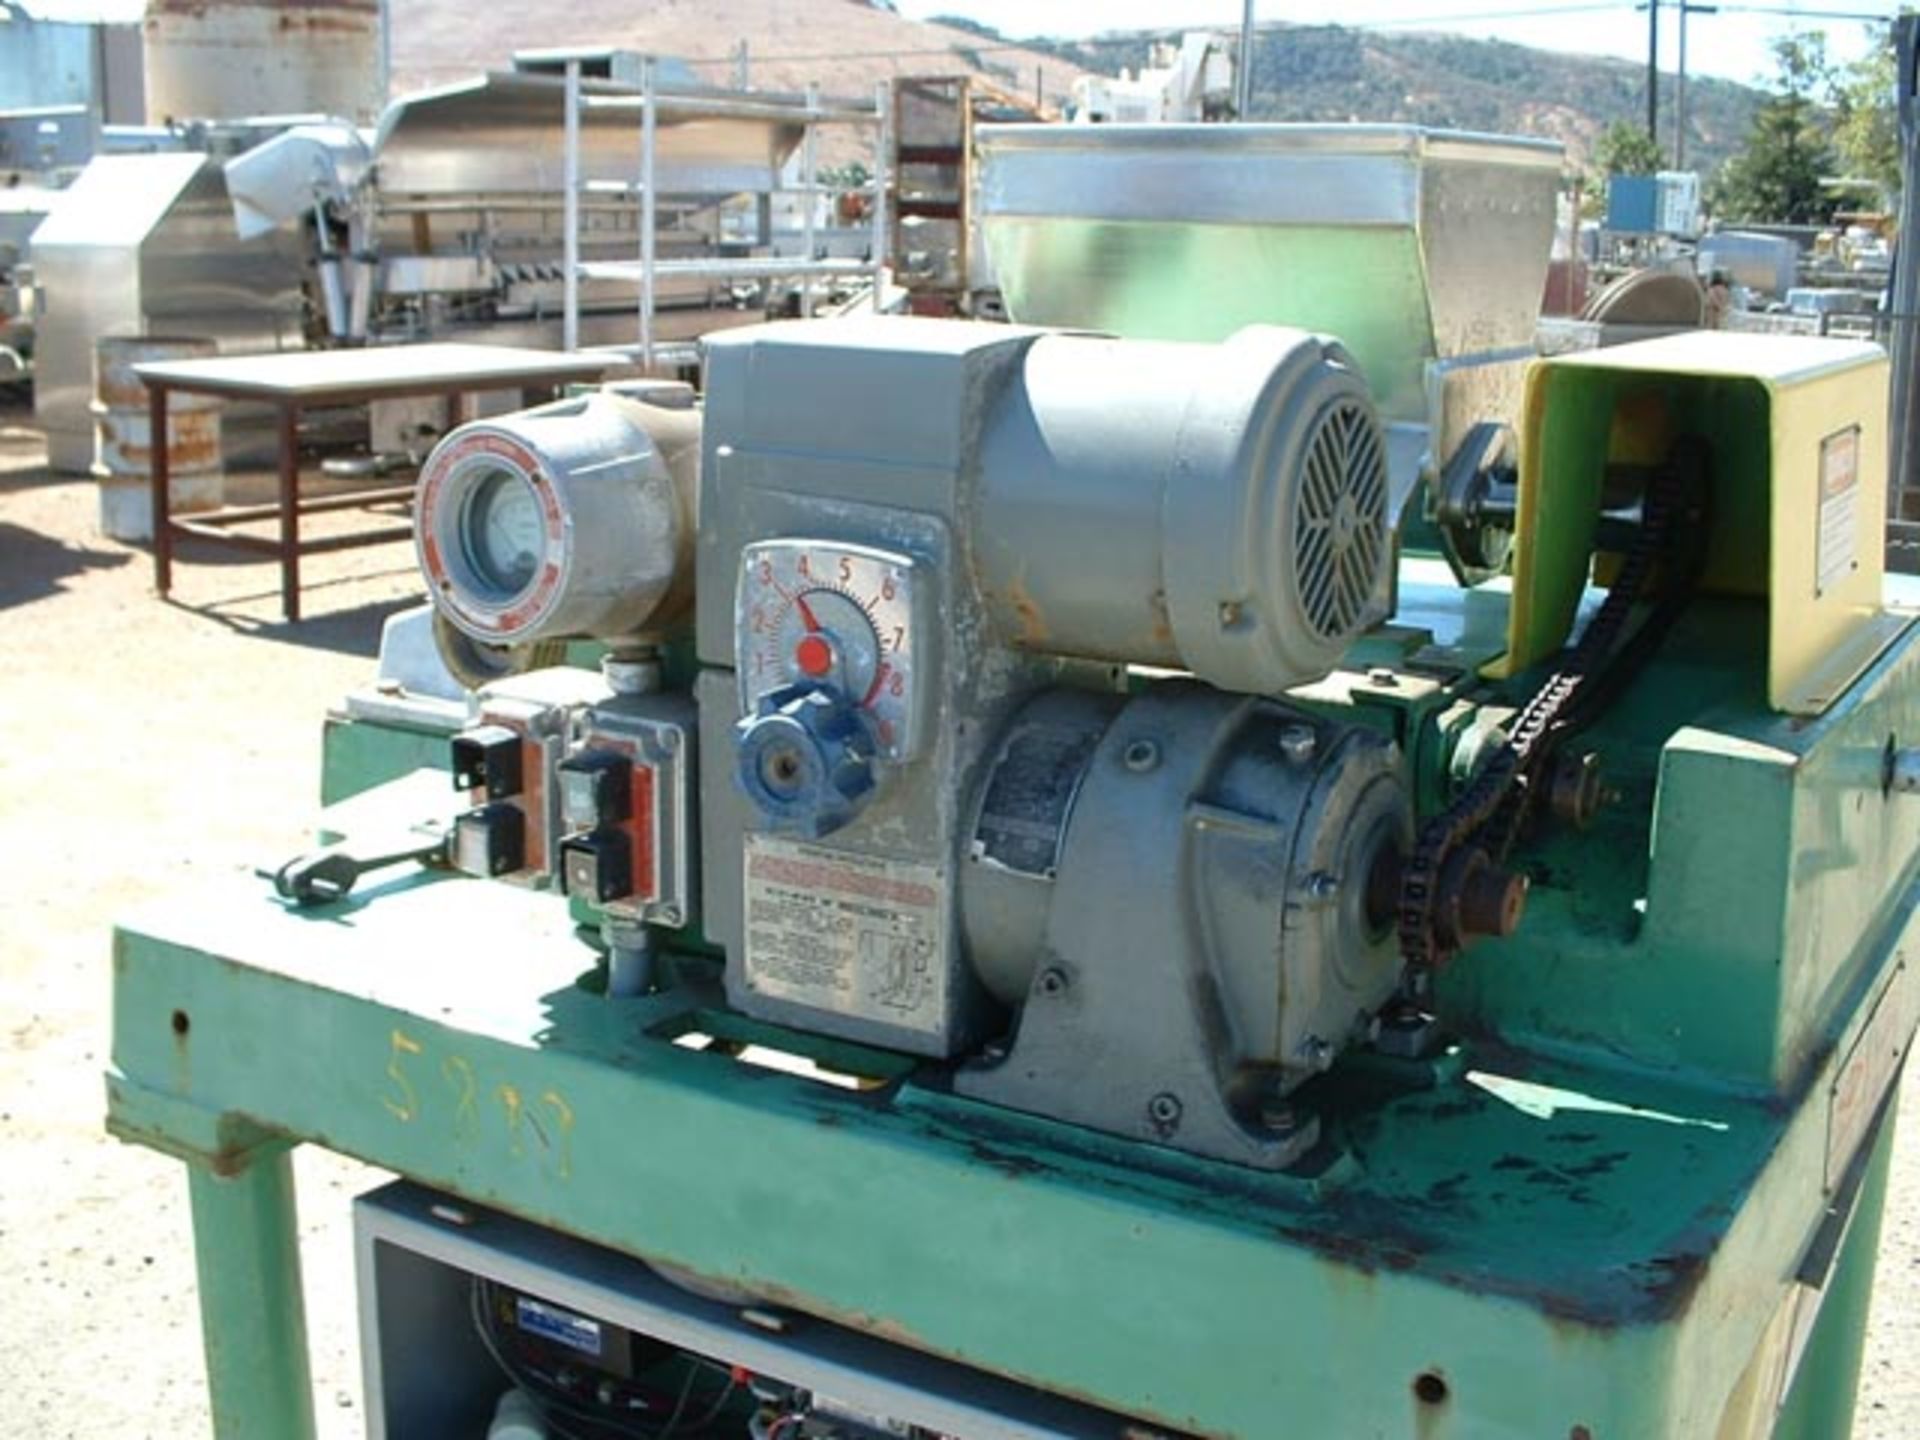 (Located in Morgan Hill, CA) Fitzpatrick Hammer Mill, Model DAS06, SN 9223, Auger Feed, S/S Product - Bild 6 aus 6